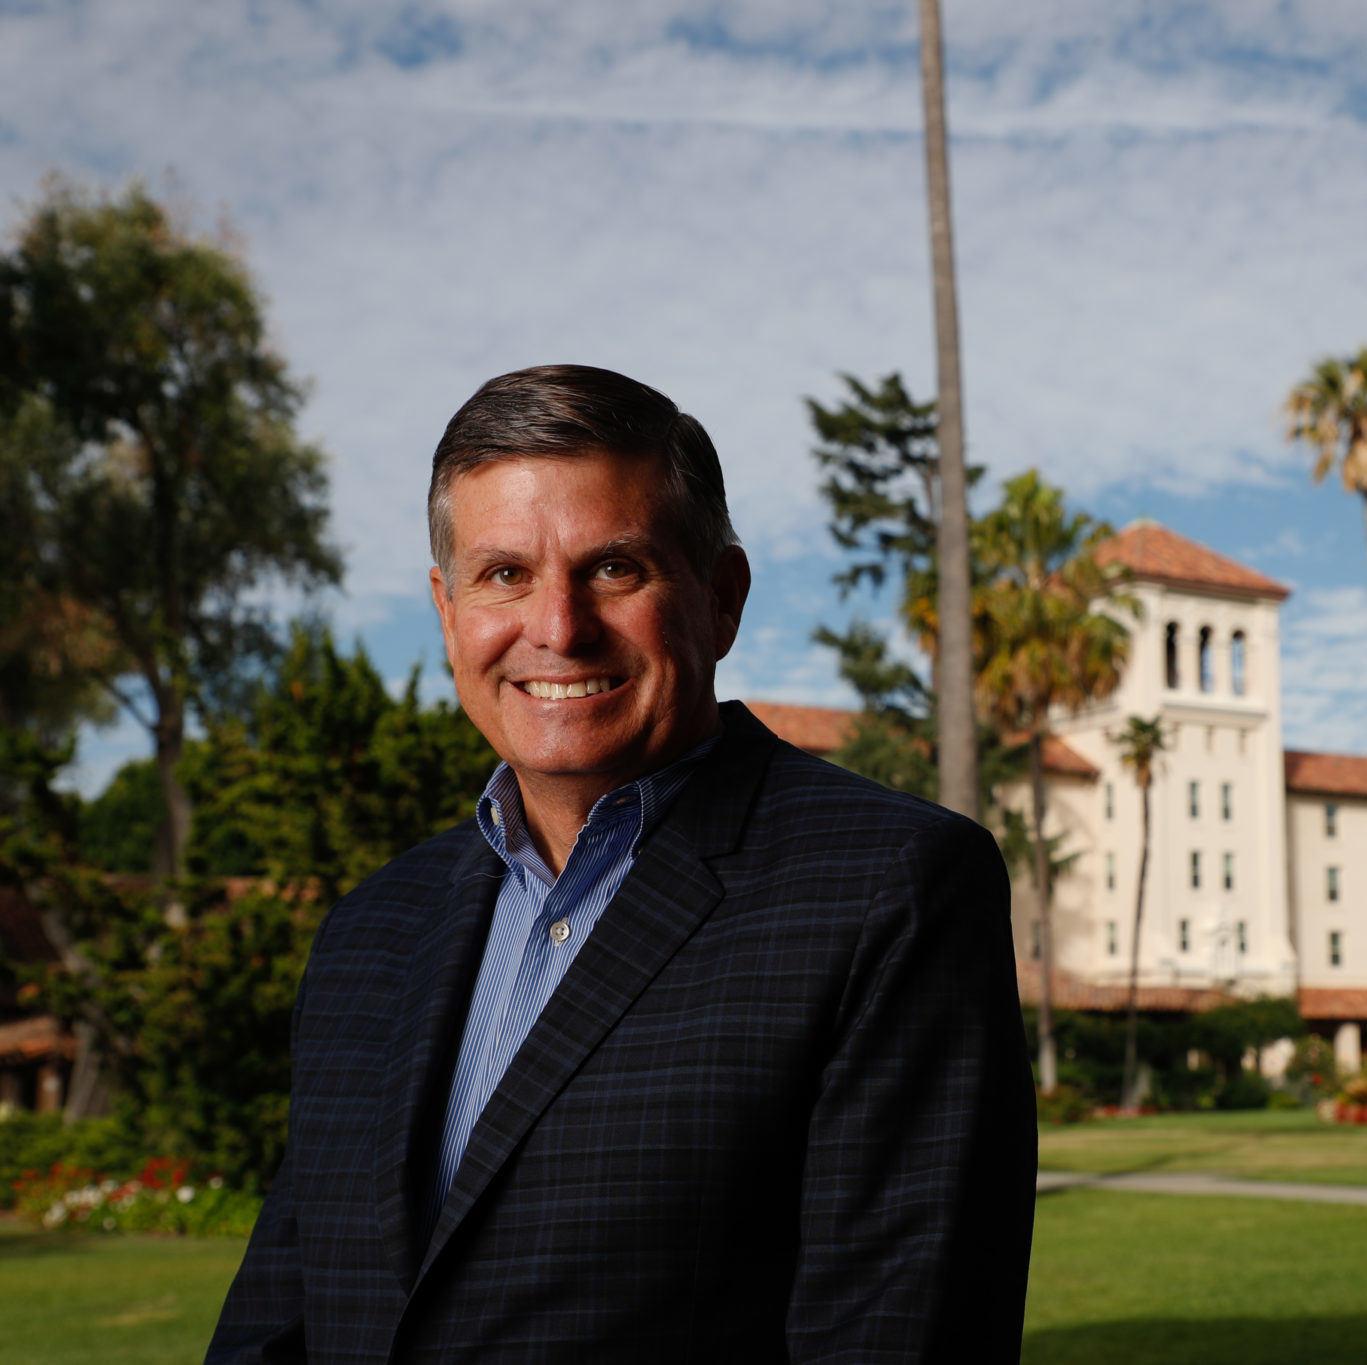 John M. Sobrato, new chair of the board of trustees